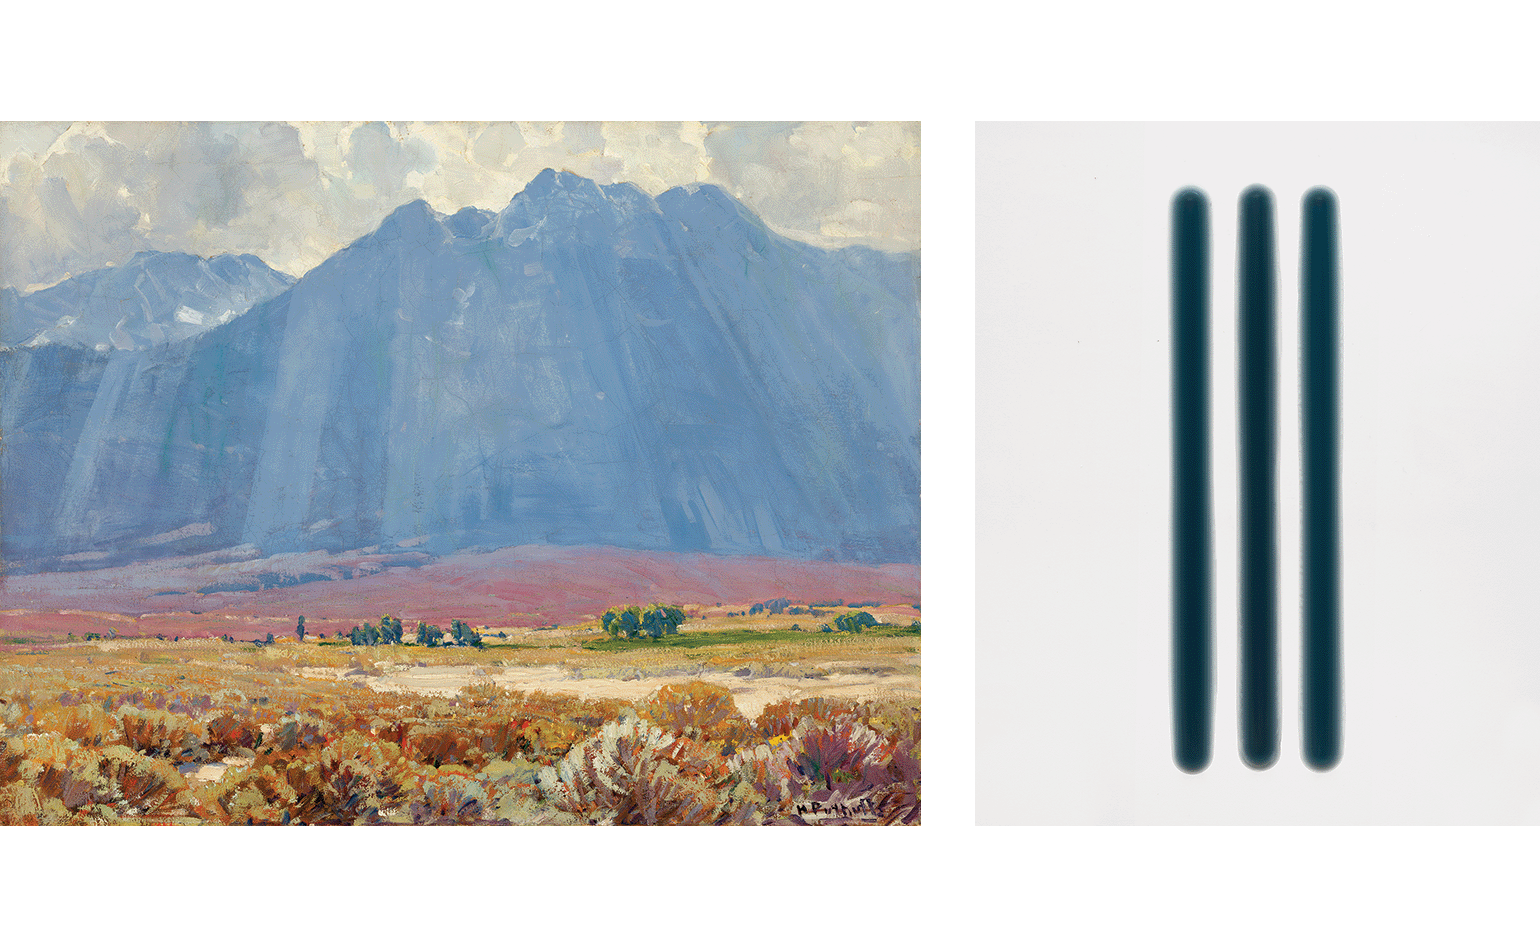 (L)Hanson Duvall Puthuff, Mystical Hills, circa 1922, Oil on canvas, 26 x 34 in. UC Irvine Institute and Museum of California Art, Gift of The Irvine Museum (R) Peter Alexander, Blue Black Bar Triptych (12/5,8,12/14), 2014, Urethane, 77 x 24 x 1 in. Lent from The Estate of Peter Alexander, © The Estate of Peter Alexander